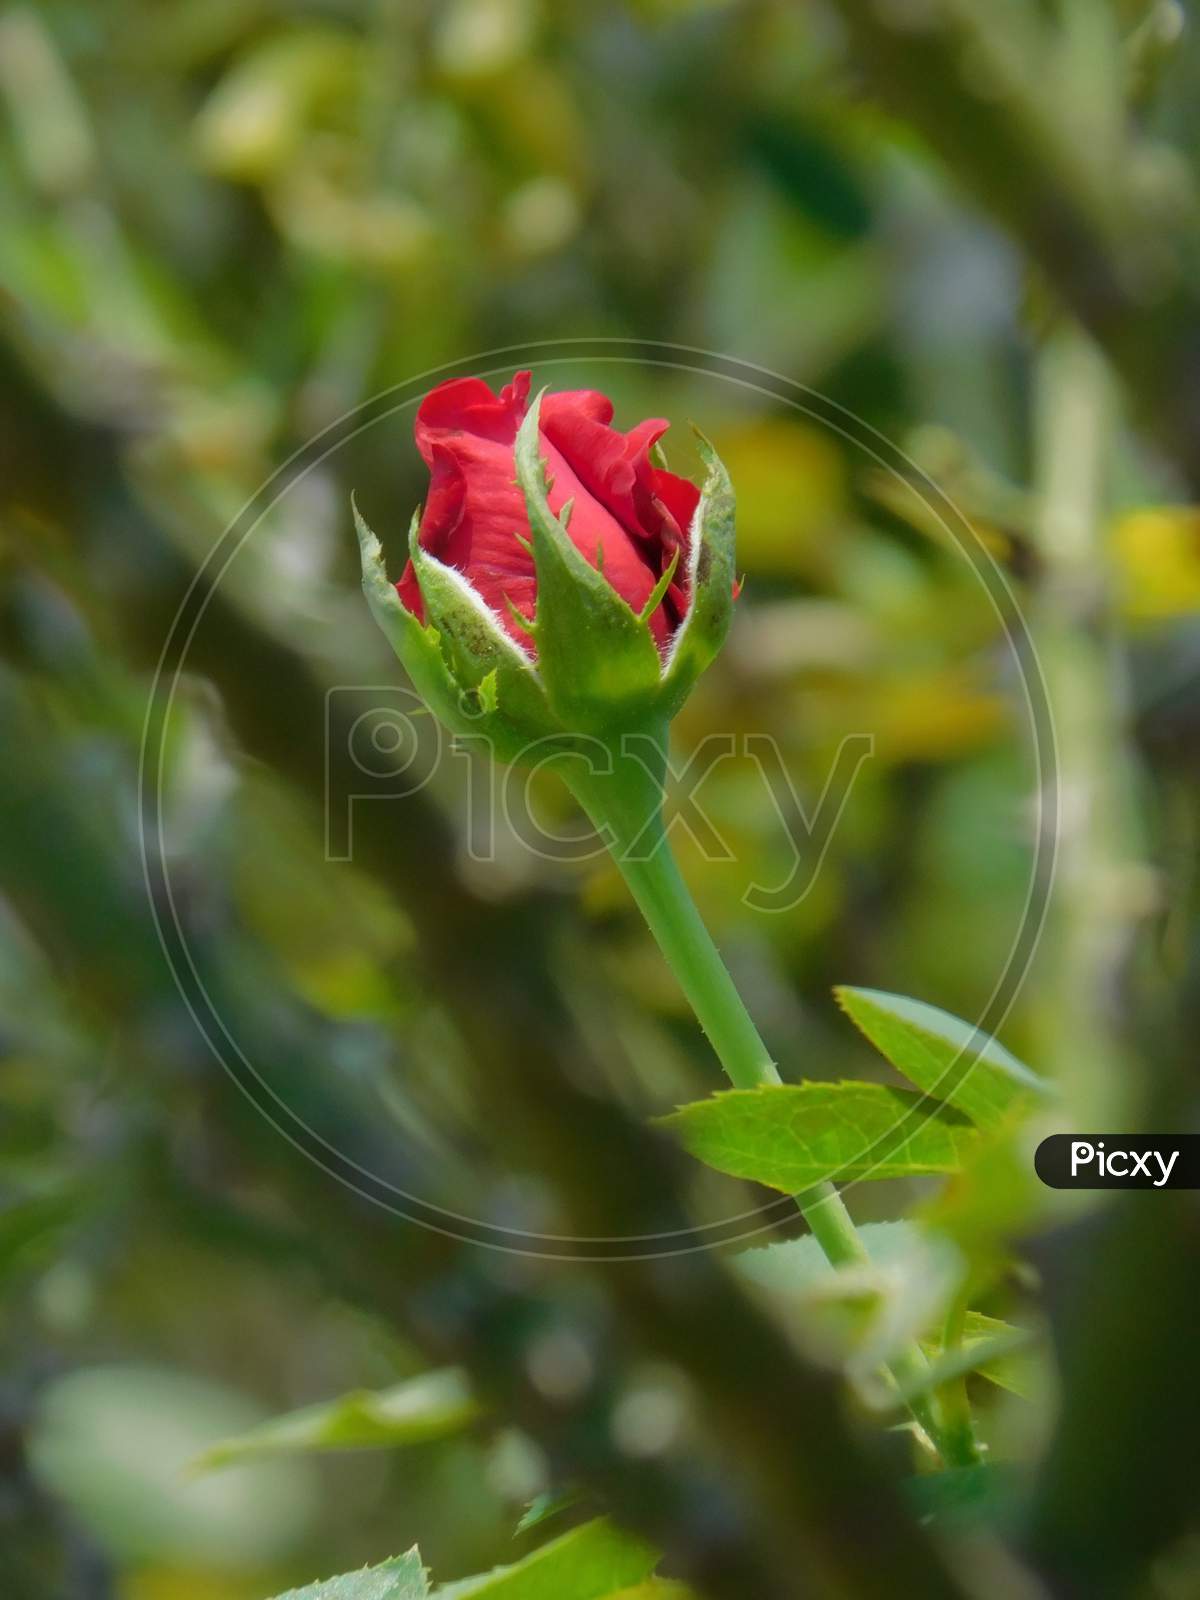 Bud of red rose.